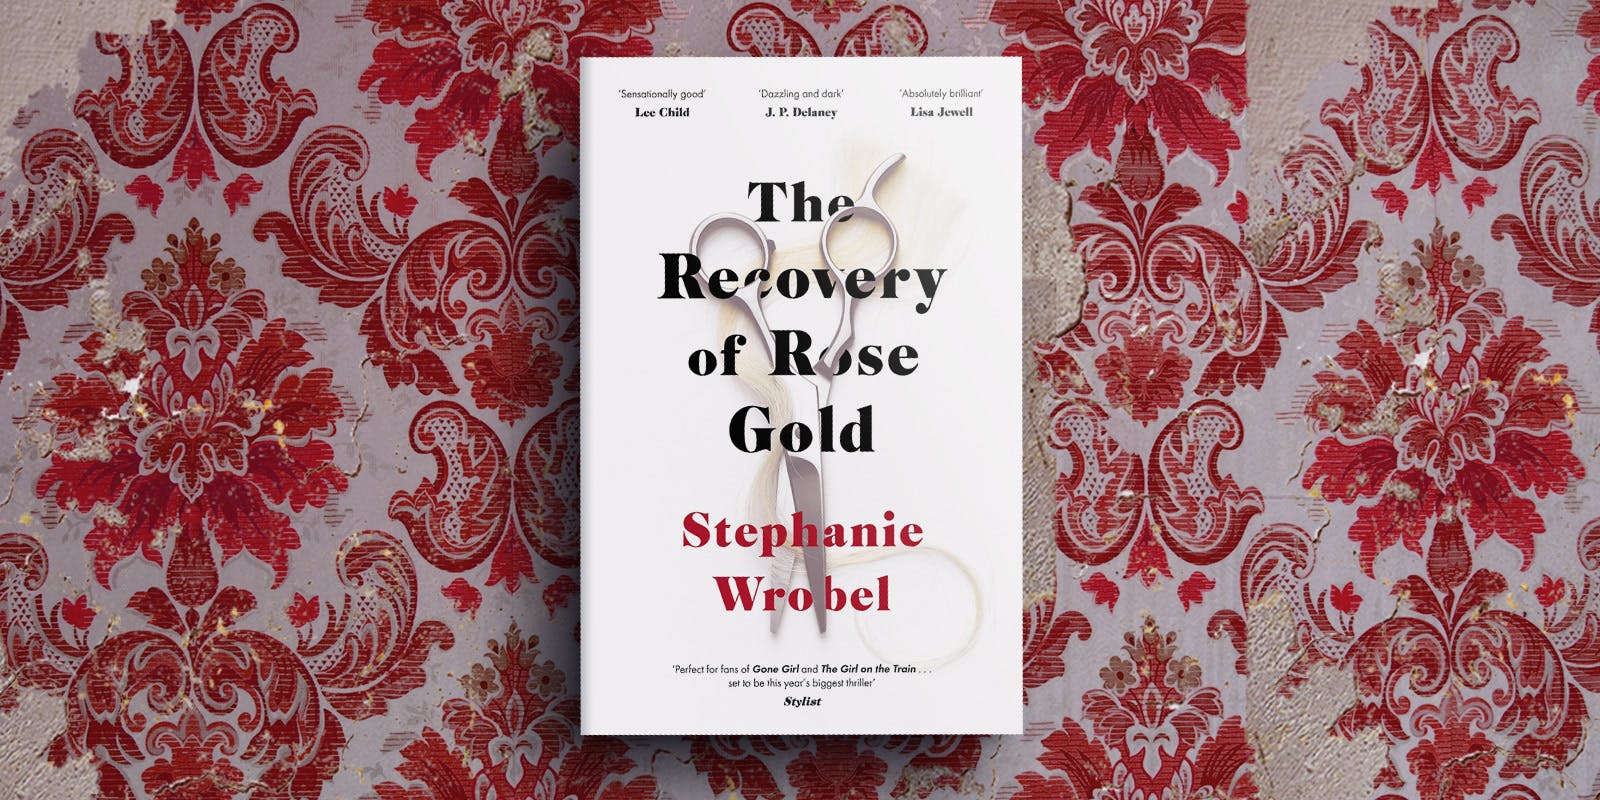 The Recovery of Rose Gold book club notes